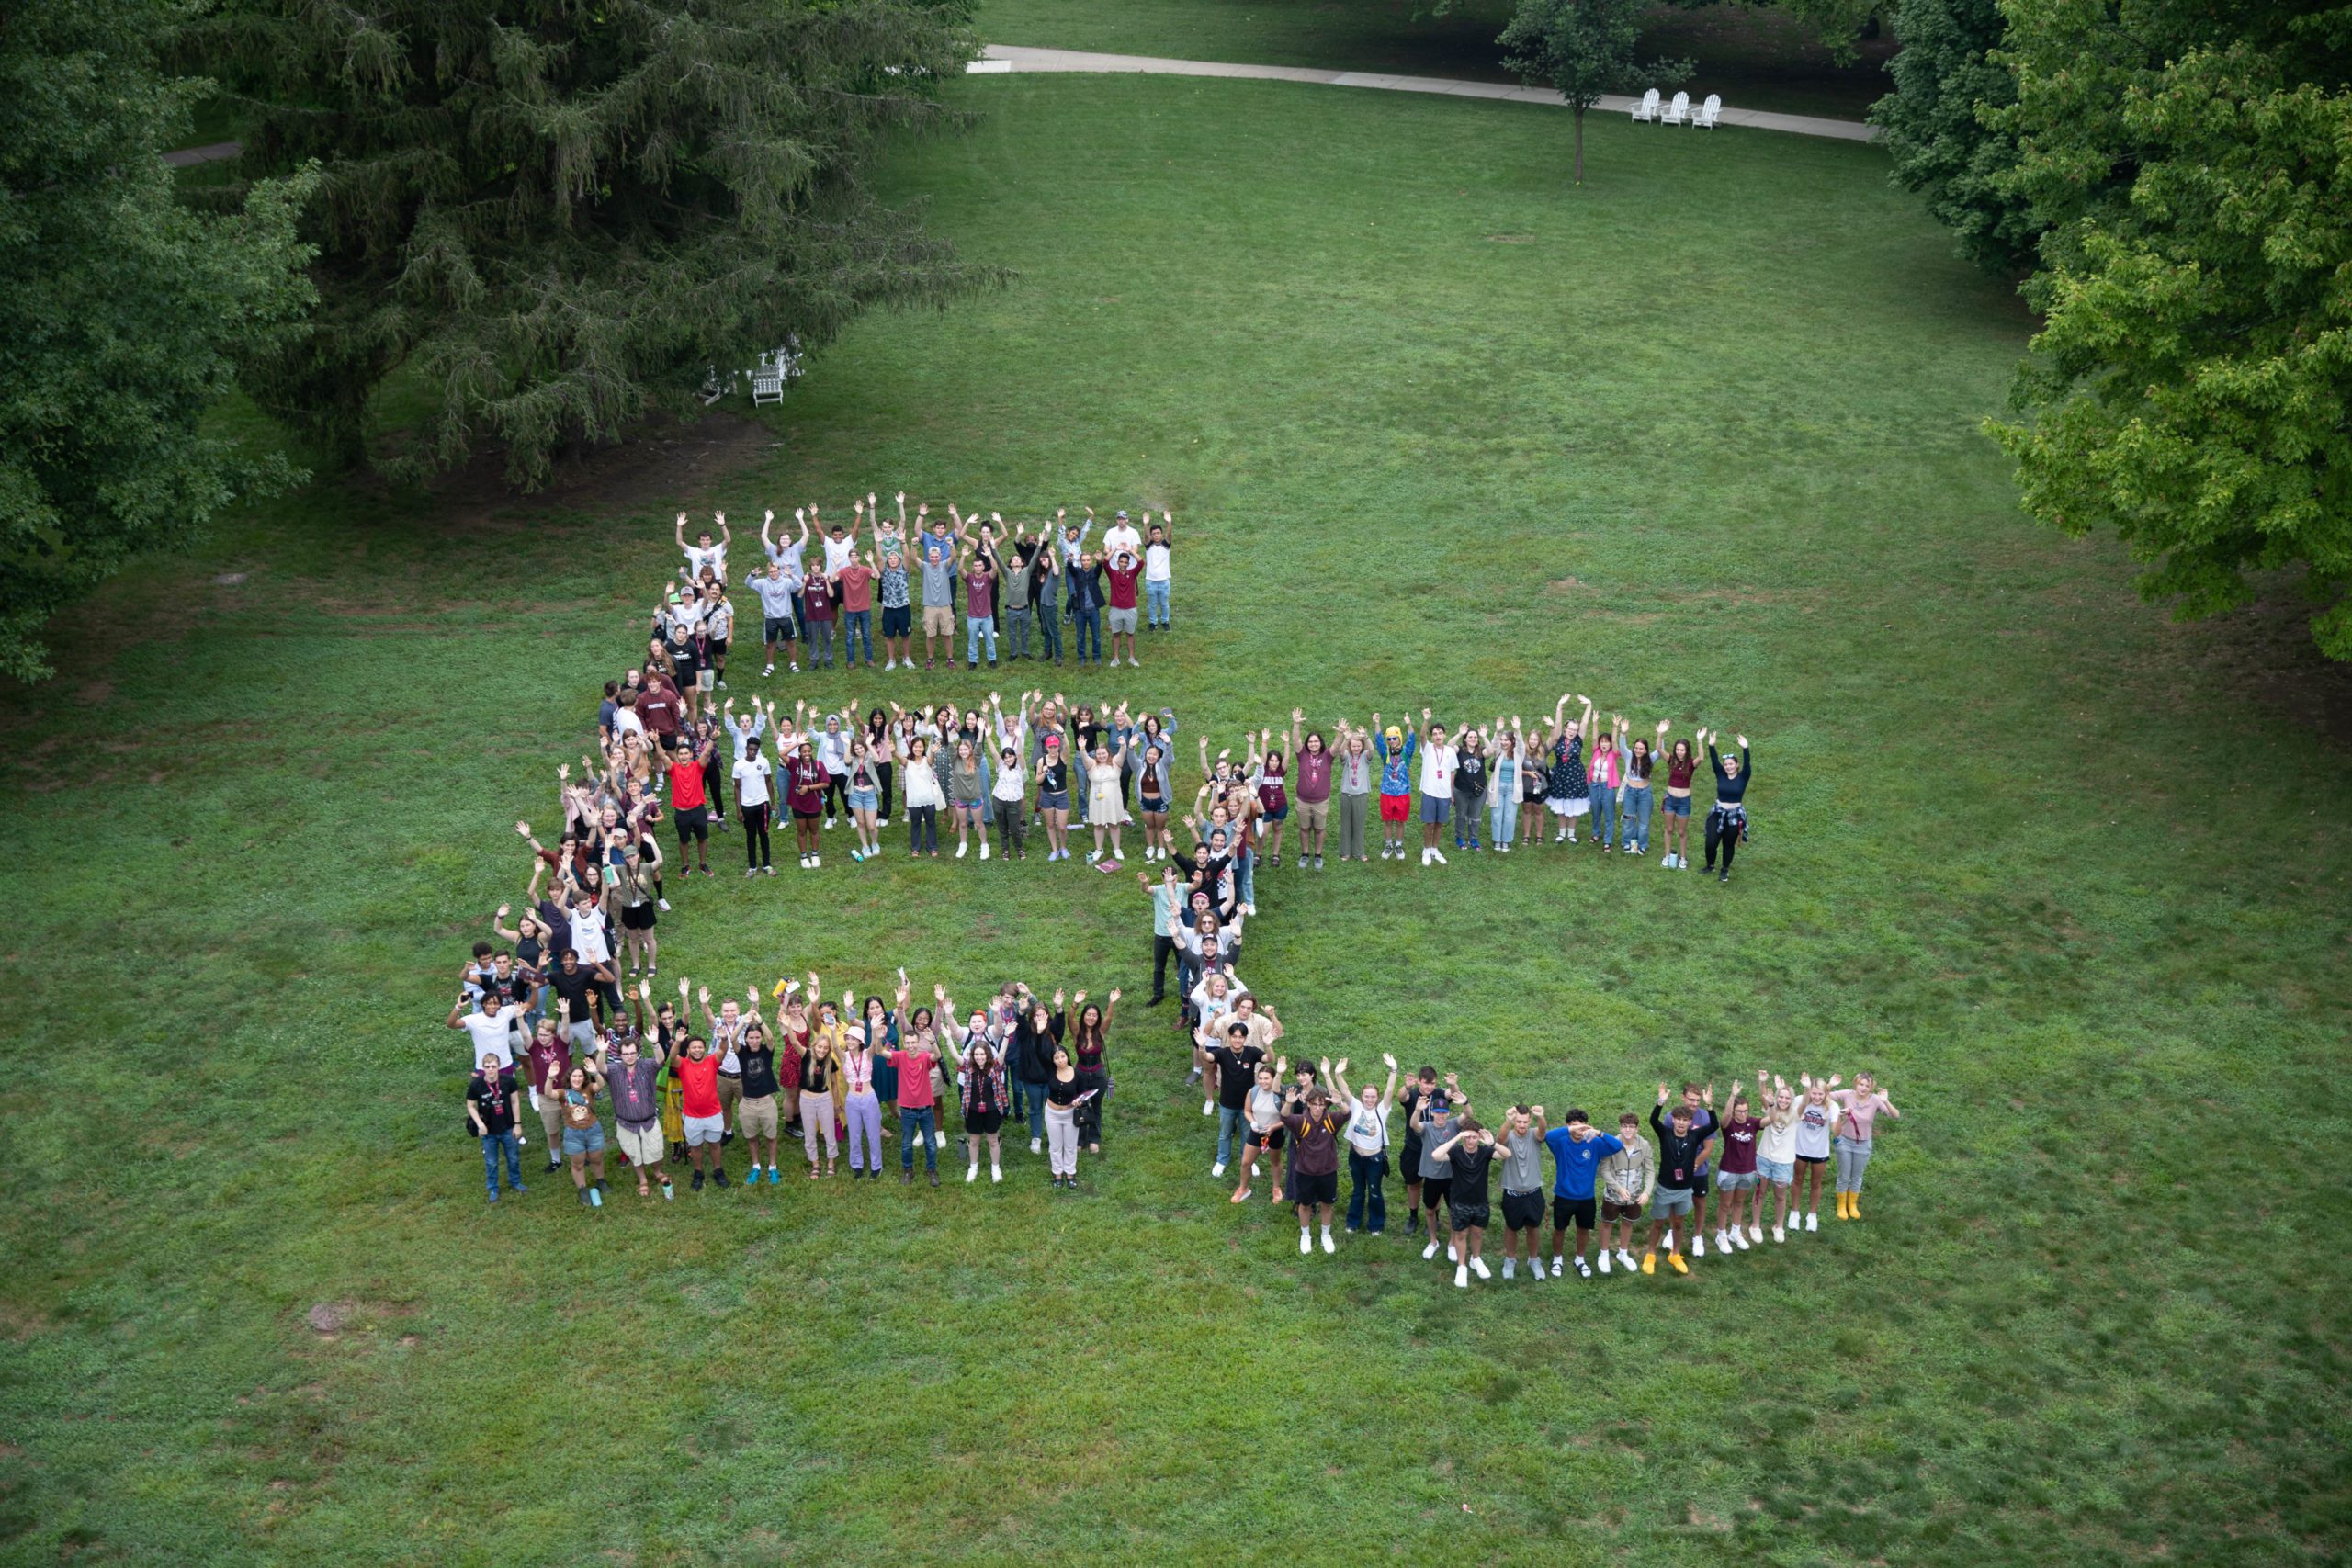 Hello EC! The Class of 2026 stands on The Heart for their New Student Orientation photo.